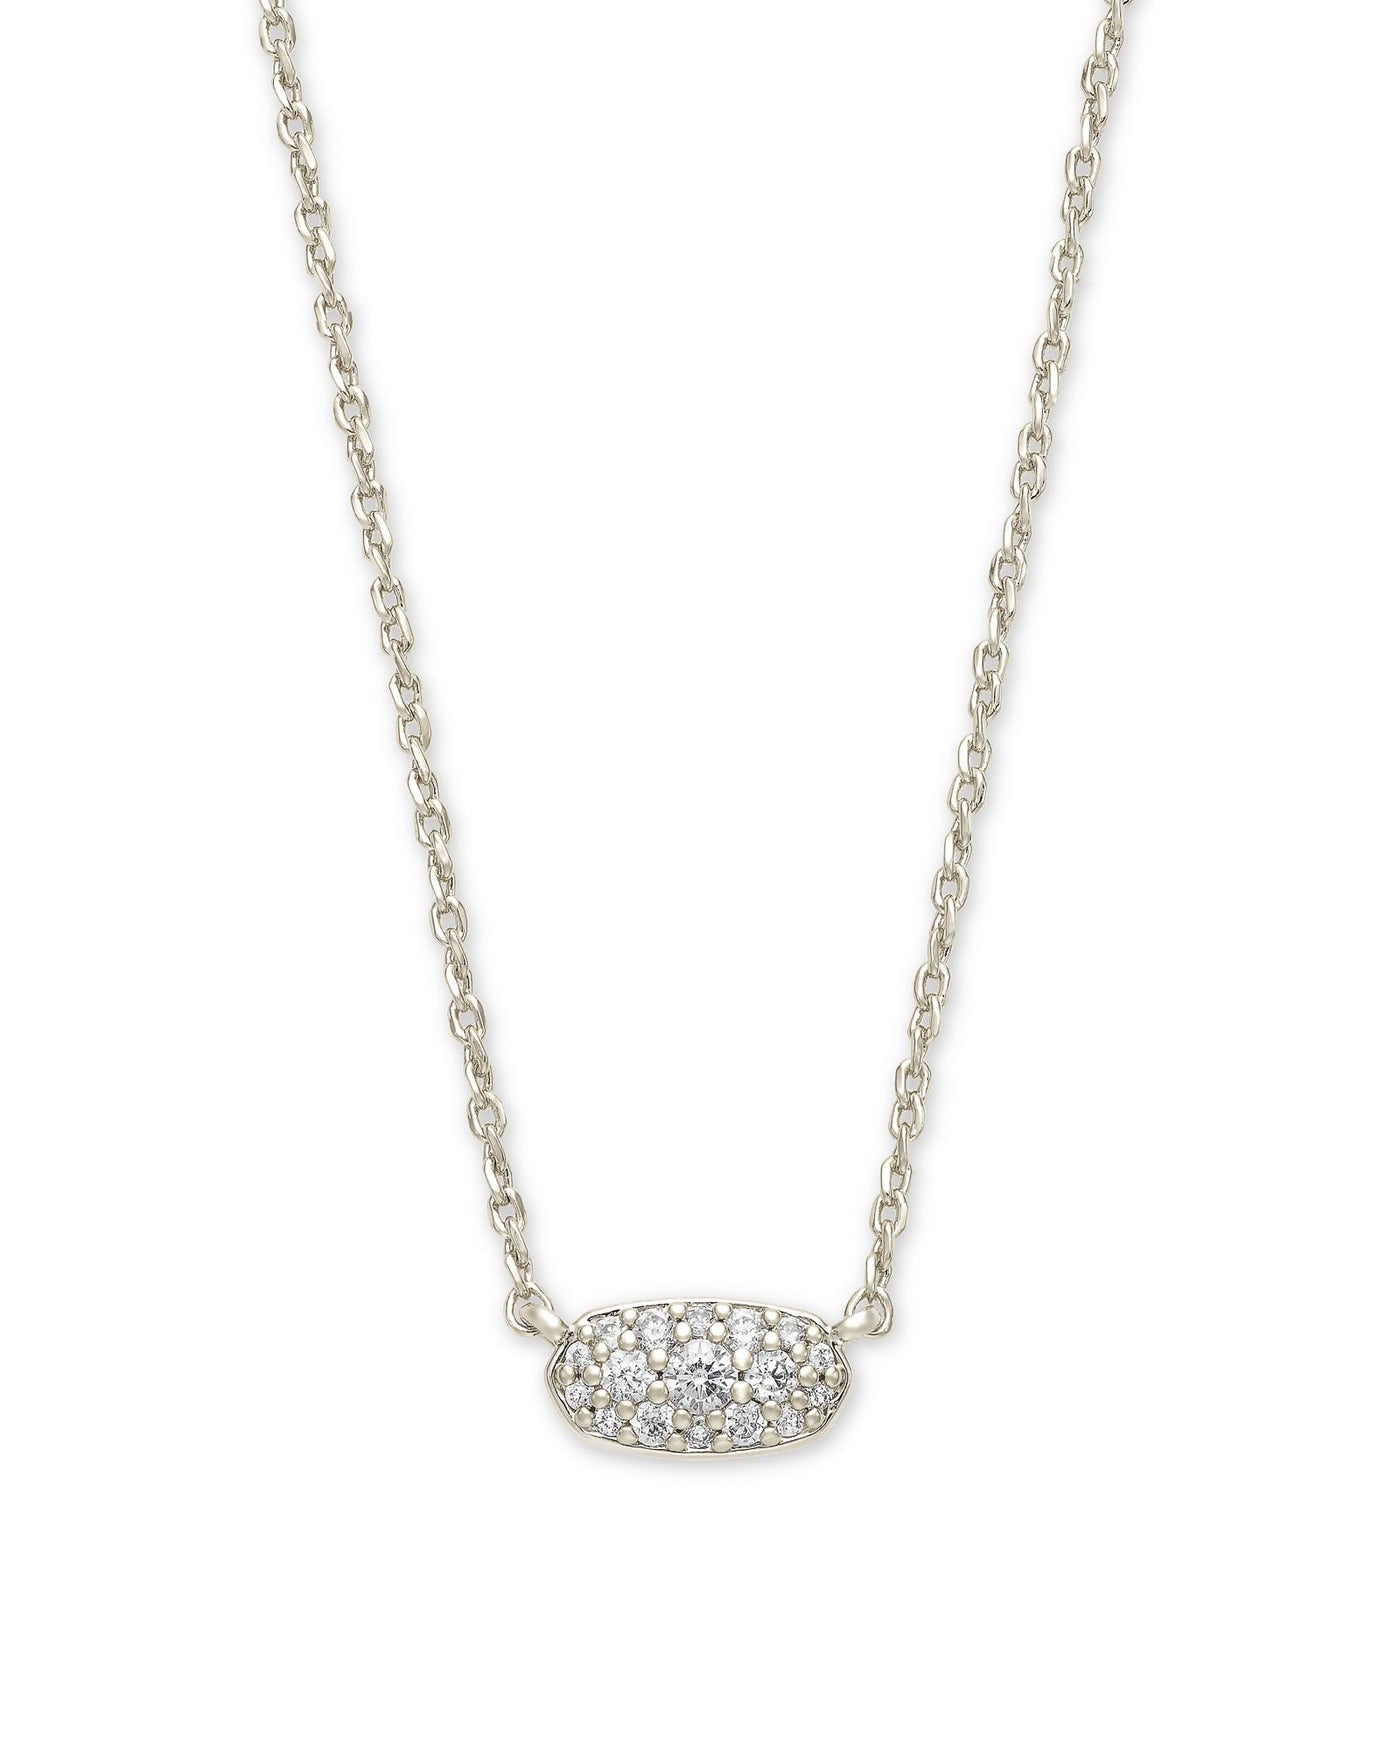 Kendra Scott Grayson Silver Pendant Necklace in White Crystal-Necklaces-Kendra Scott-Market Street Nest, Fashionable Clothing, Shoes and Home Décor Located in Mabank, TX